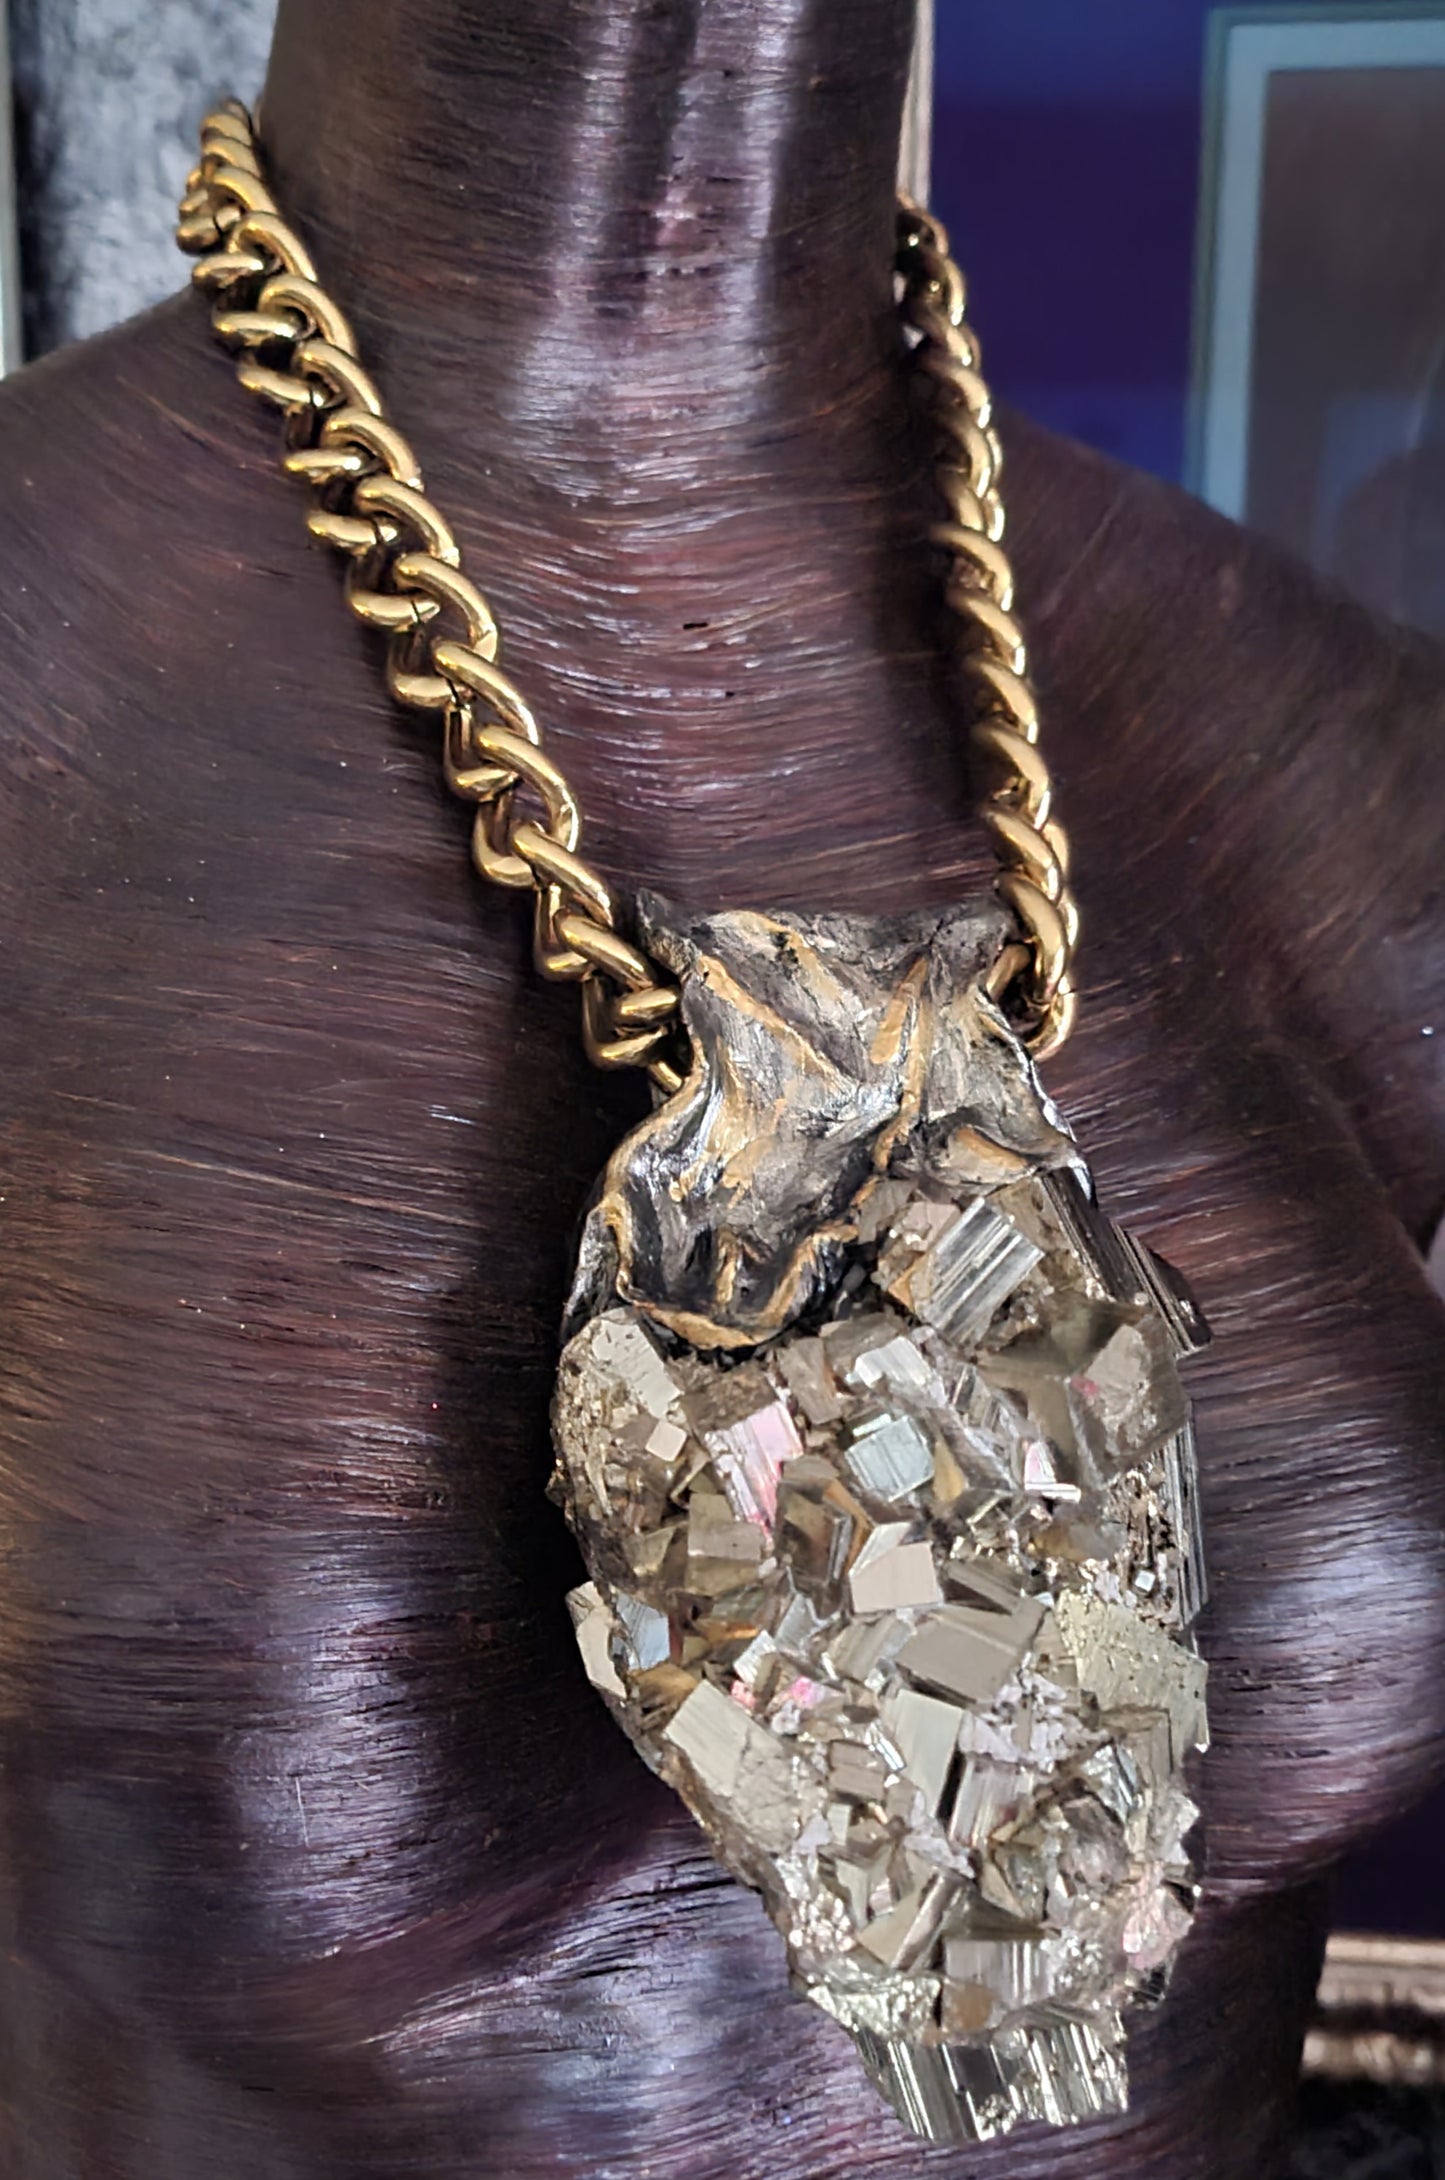 Huge Pyrite Sculpted Statement Pendant, Silver Gold Crystal Amulet, Flashy Gemstone Hip Hop Chest Piece, Mens Rocker Chic Accessory, R & B Jewelry